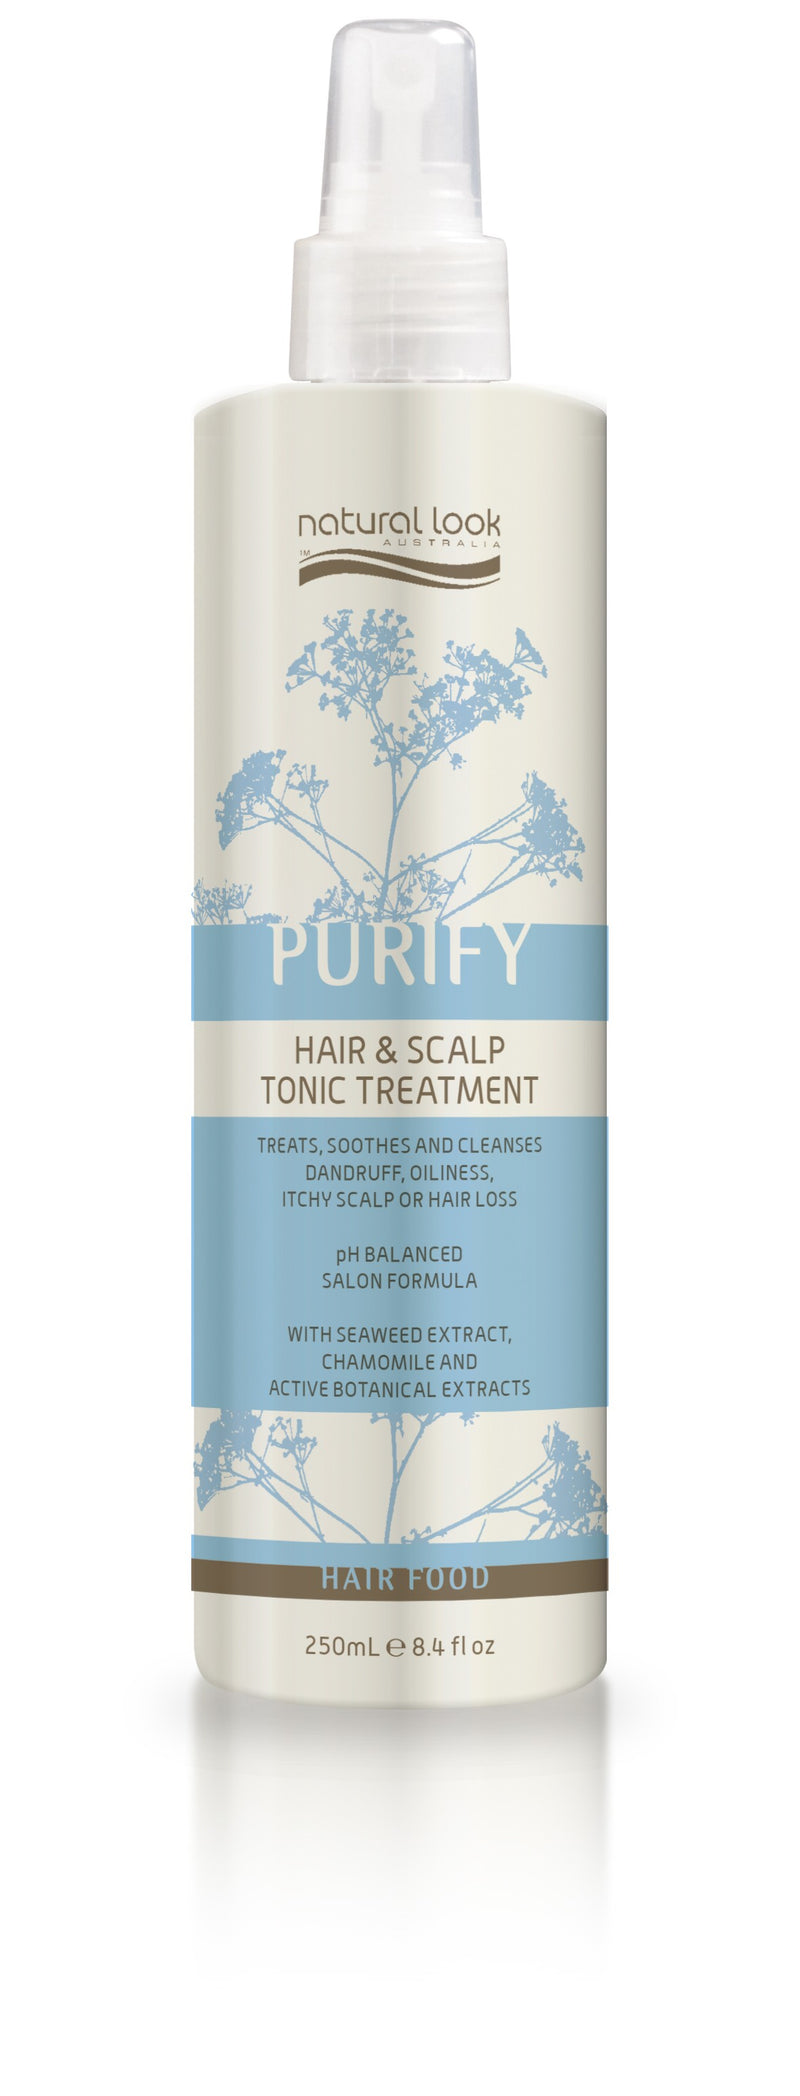 Natural Look Purify Hair and Scalp Tonic Treatment 250ML